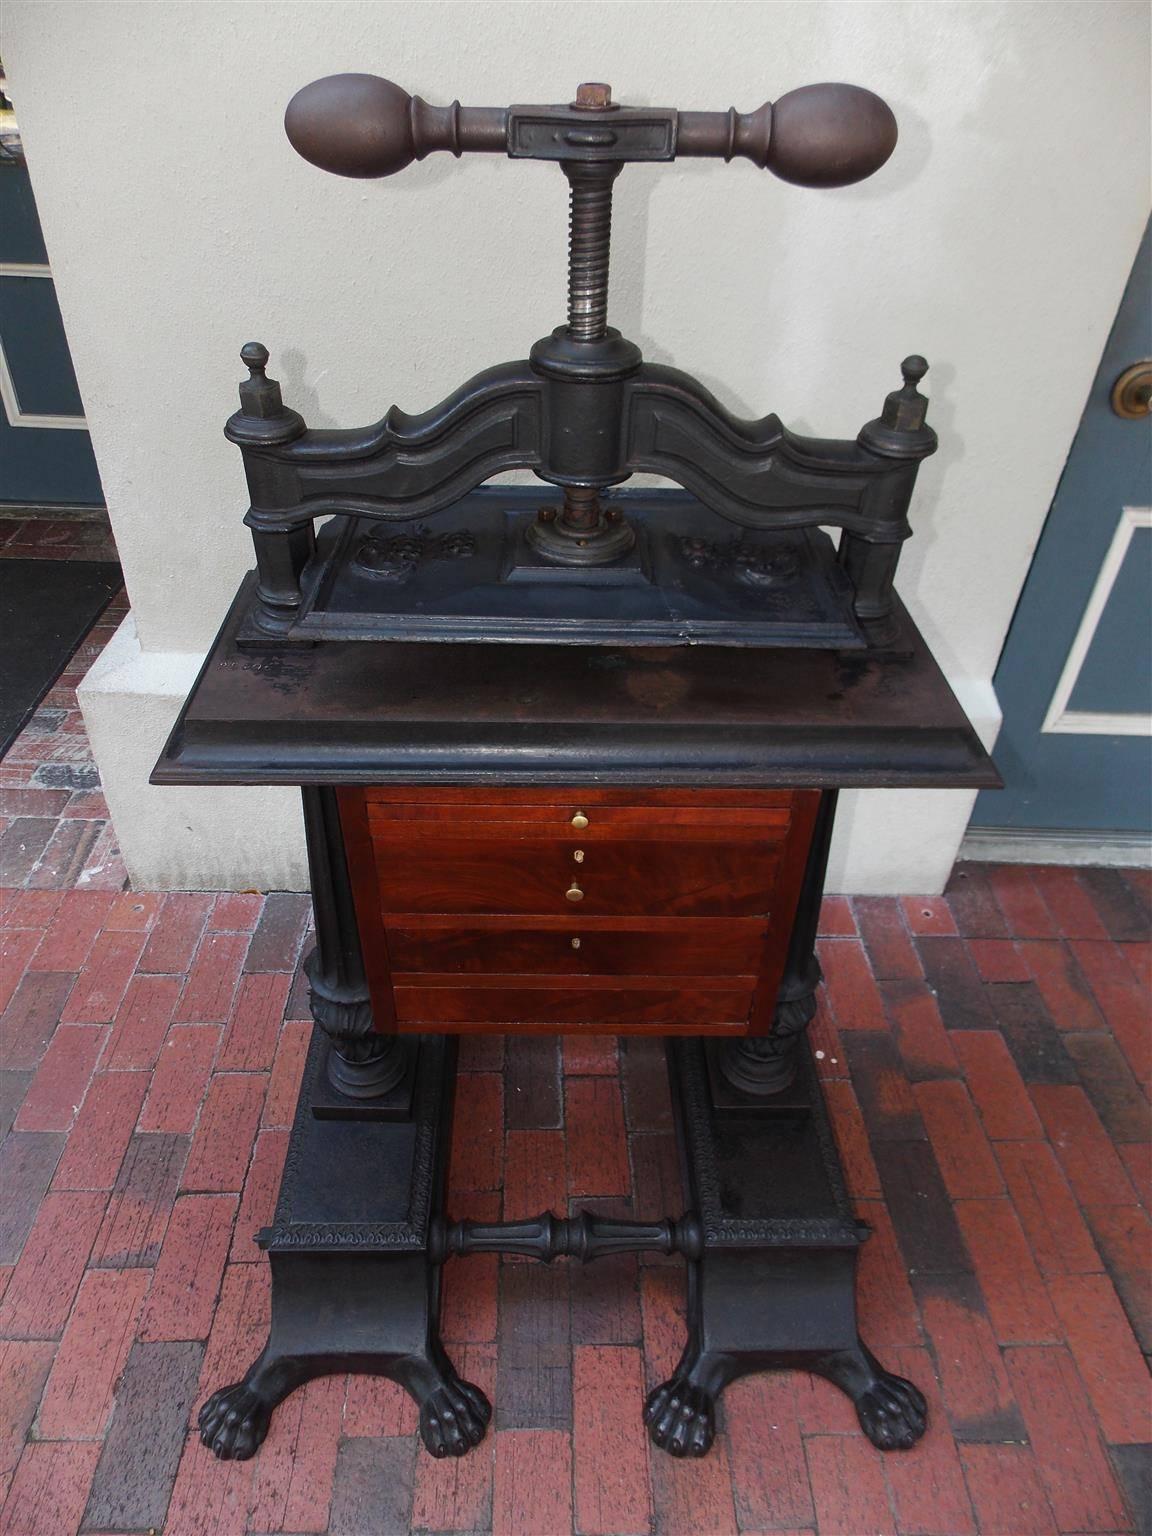 American cast iron and mahogany two-drawer copying press with a turned bulbous cork screw handle, floral decorative pressure plate, flanking fluted decorative side columns, and resting on flanking rectangular plinths with the original eight lions